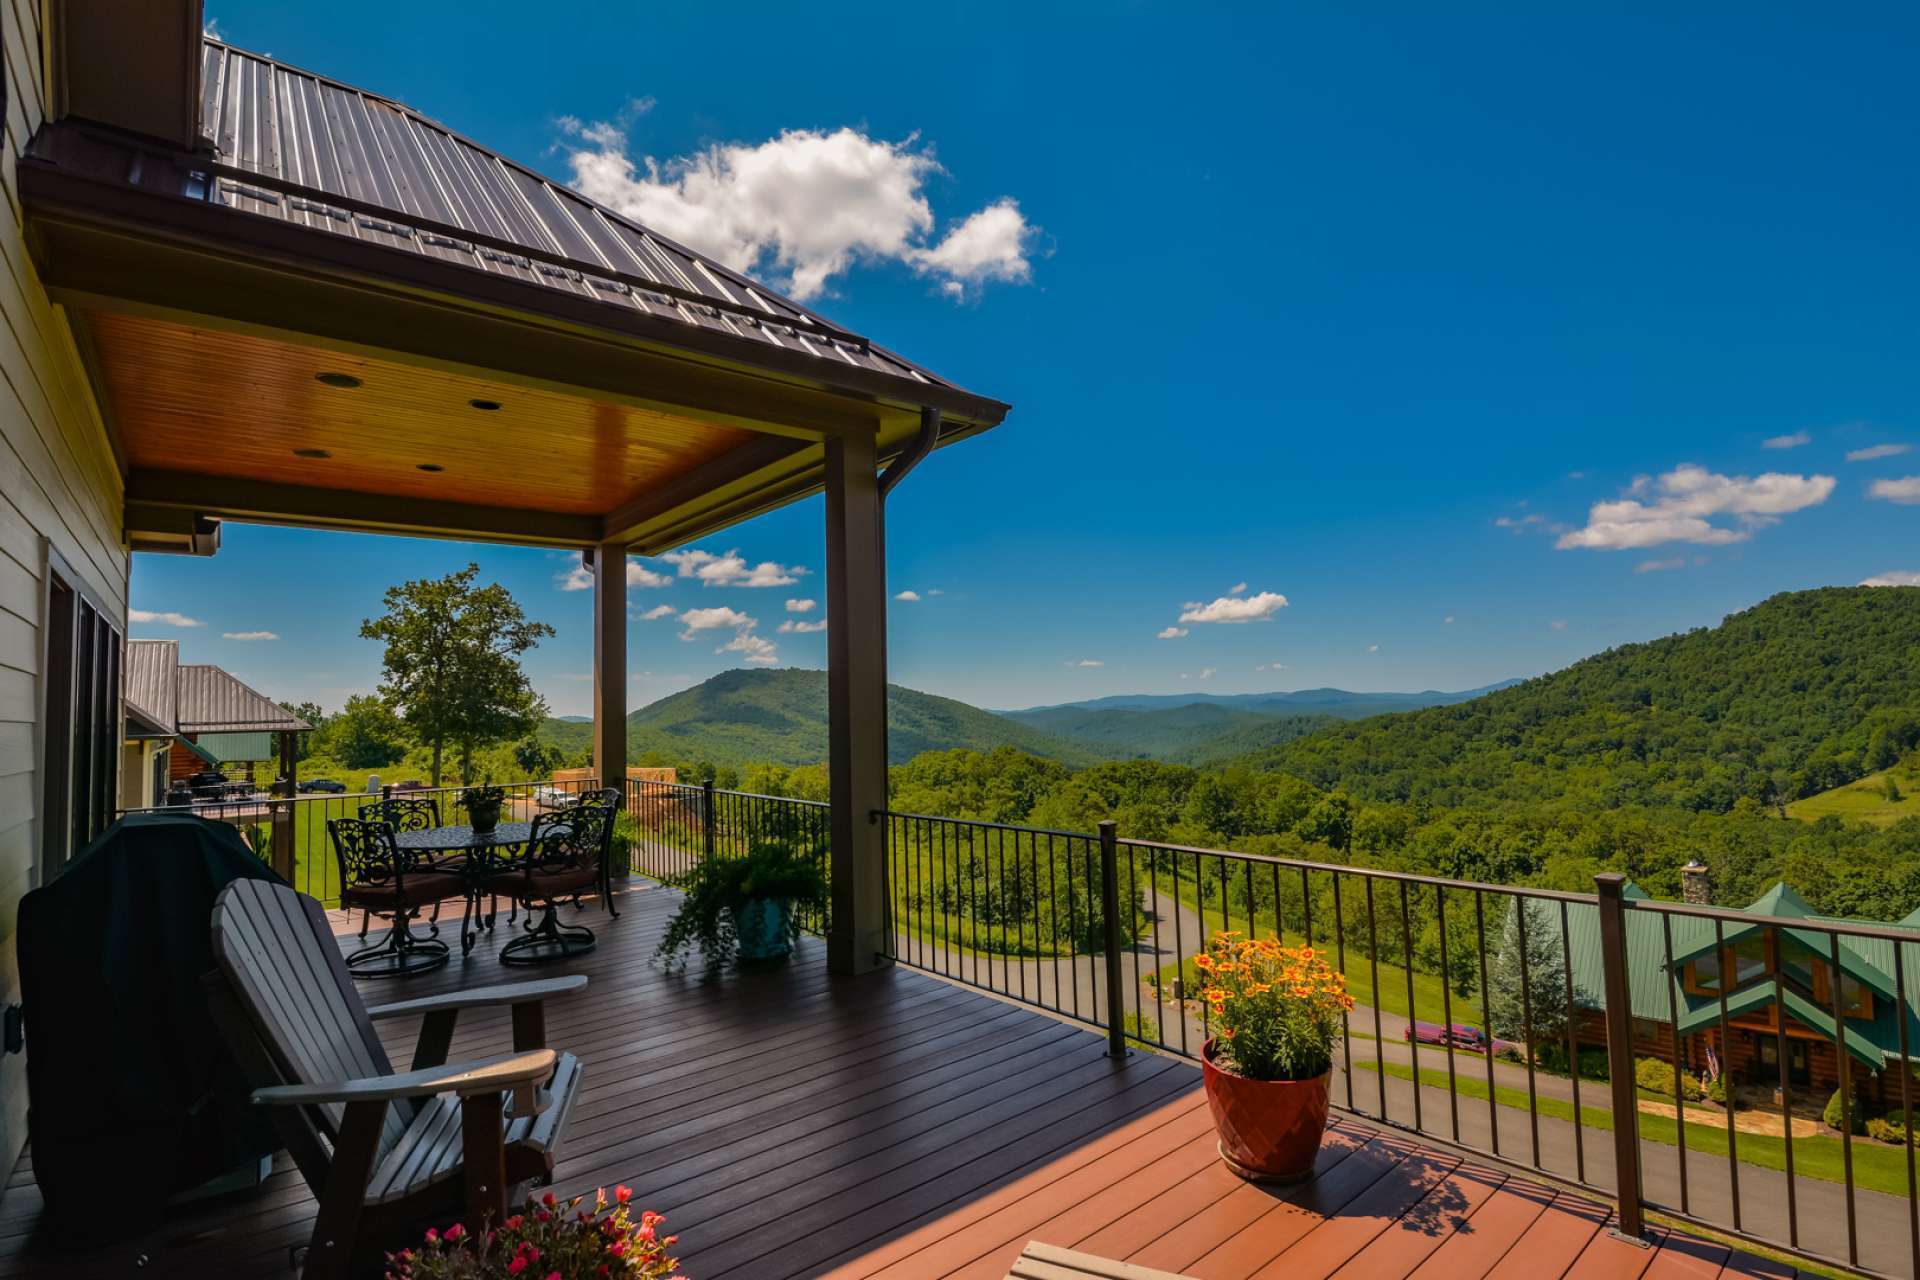 At the back of the home you may be too busy staring at the jaw-dropping view to notice the finely constructed Trex-type back decking and covered porch with built-in music system. What unbeatable spot for cook-outs and entertaining.